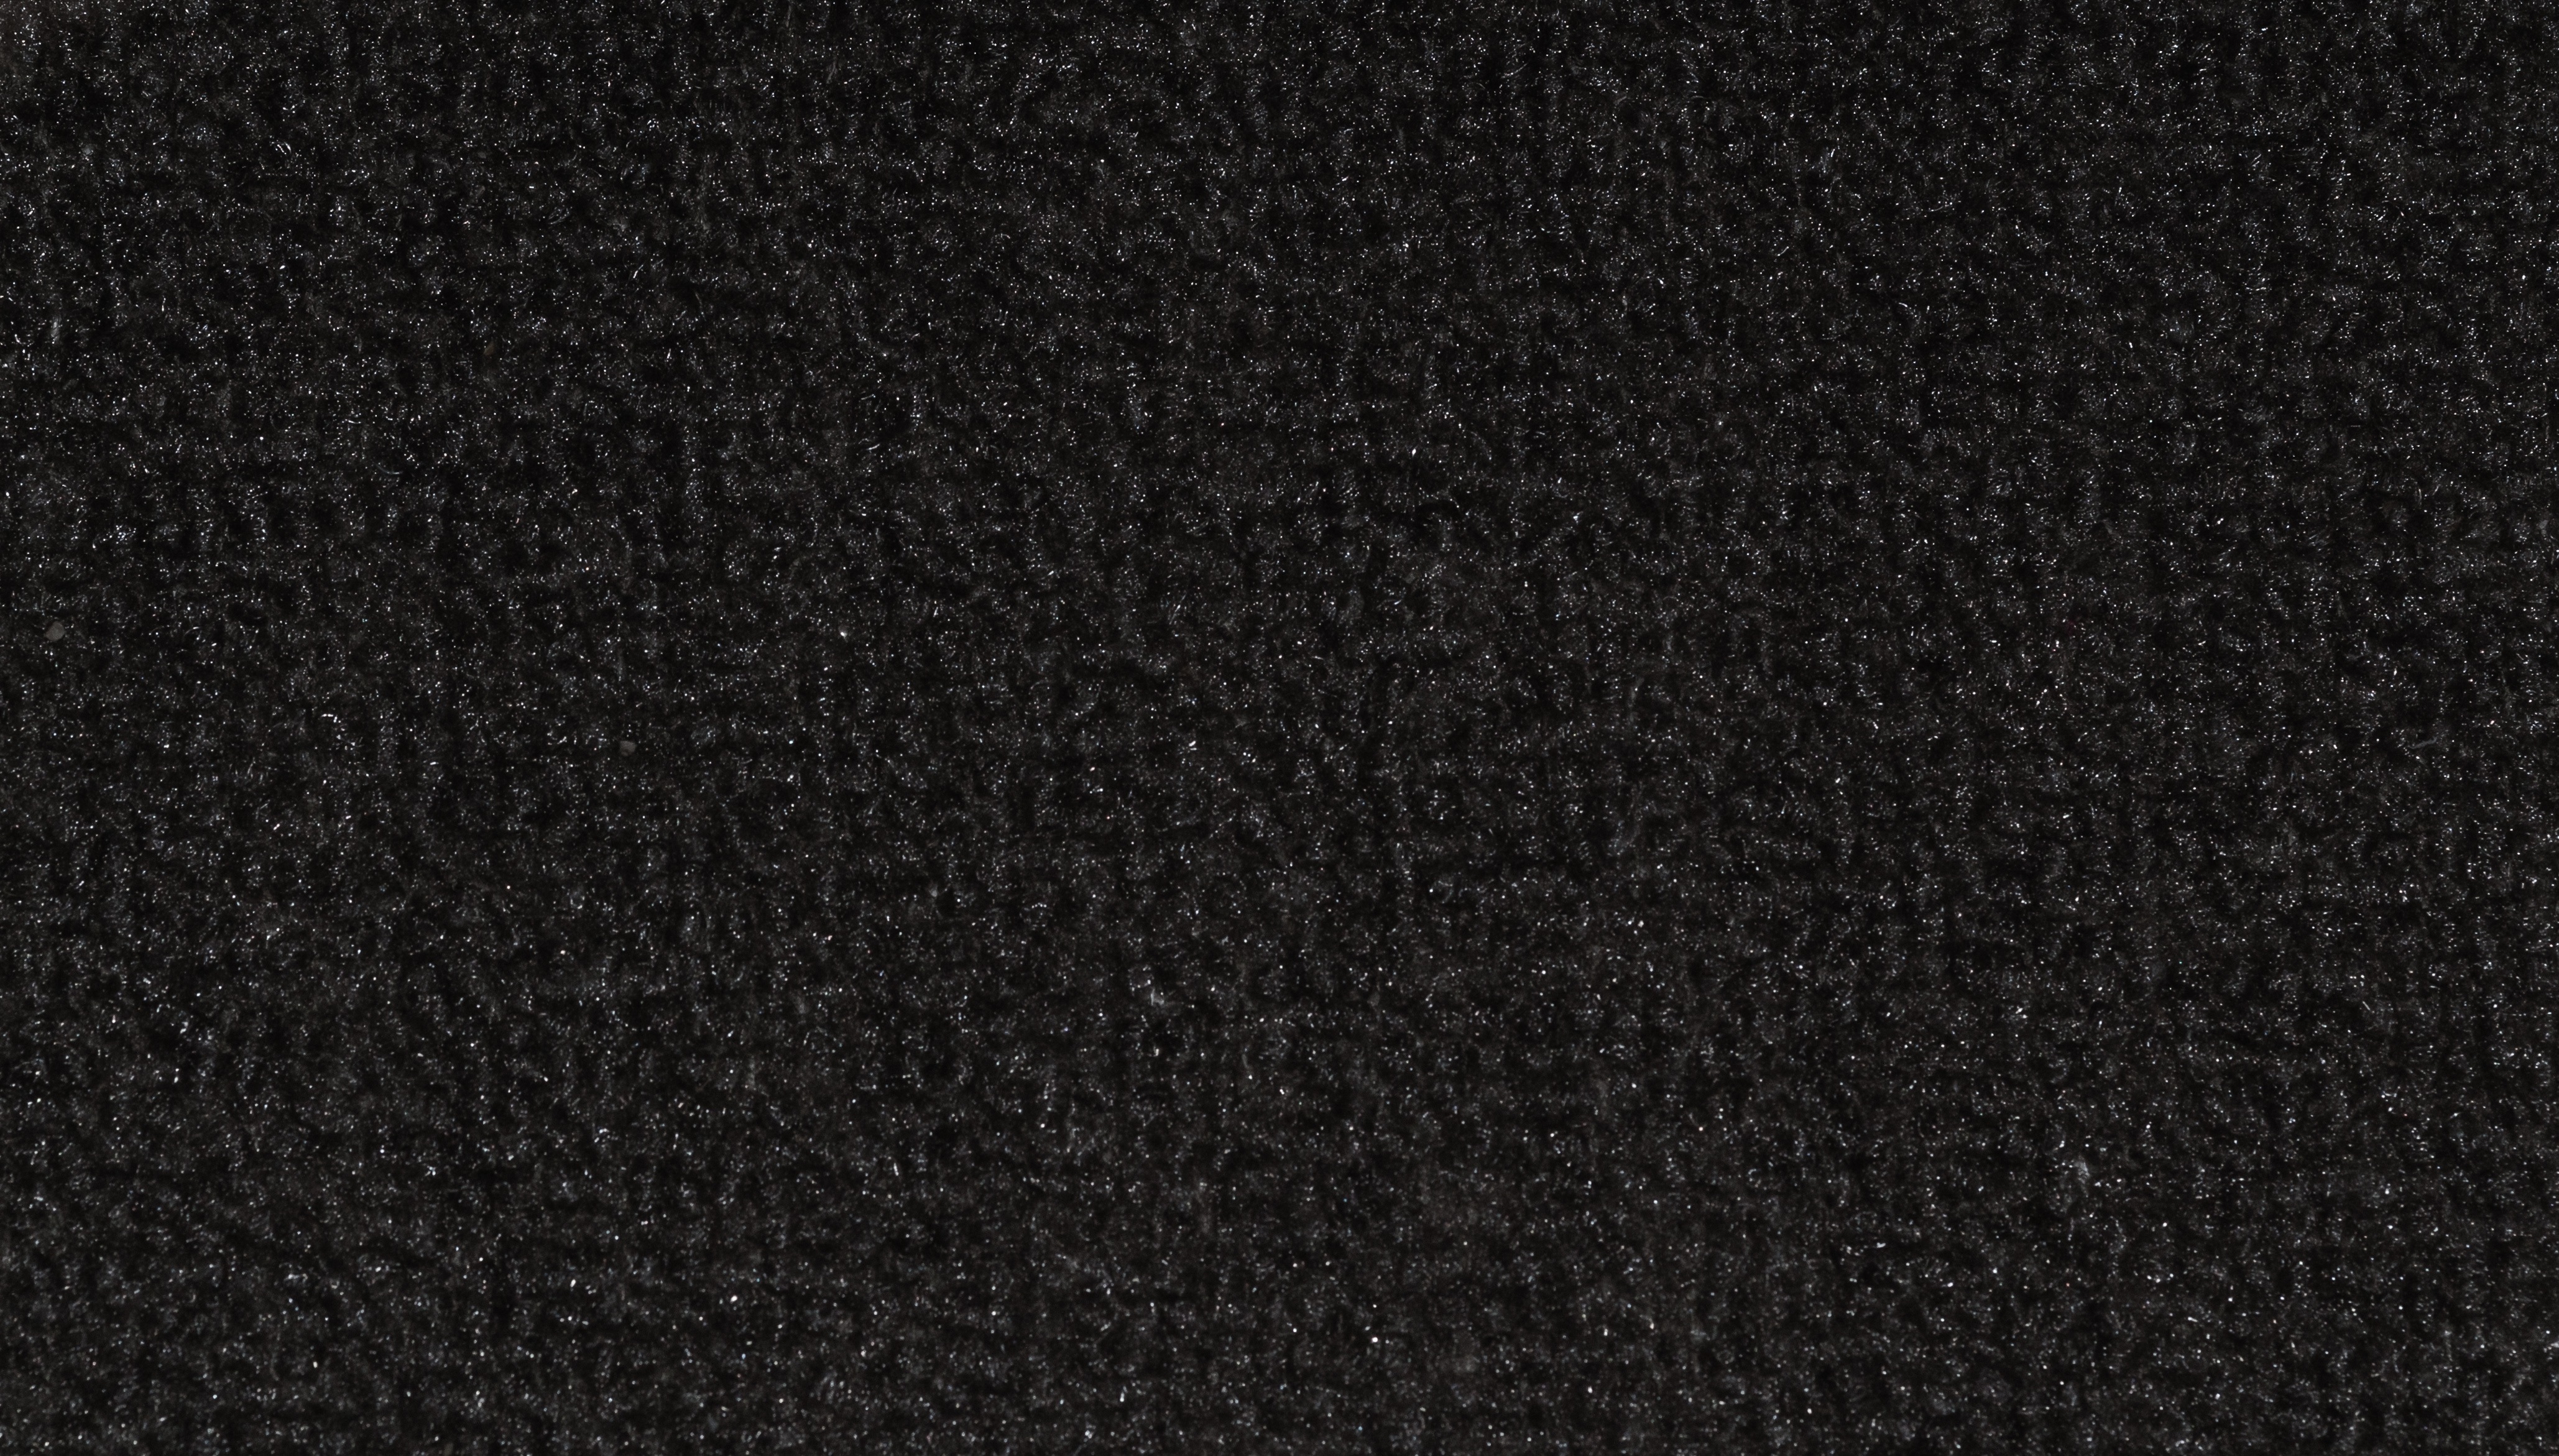 The texture of black wool fabric